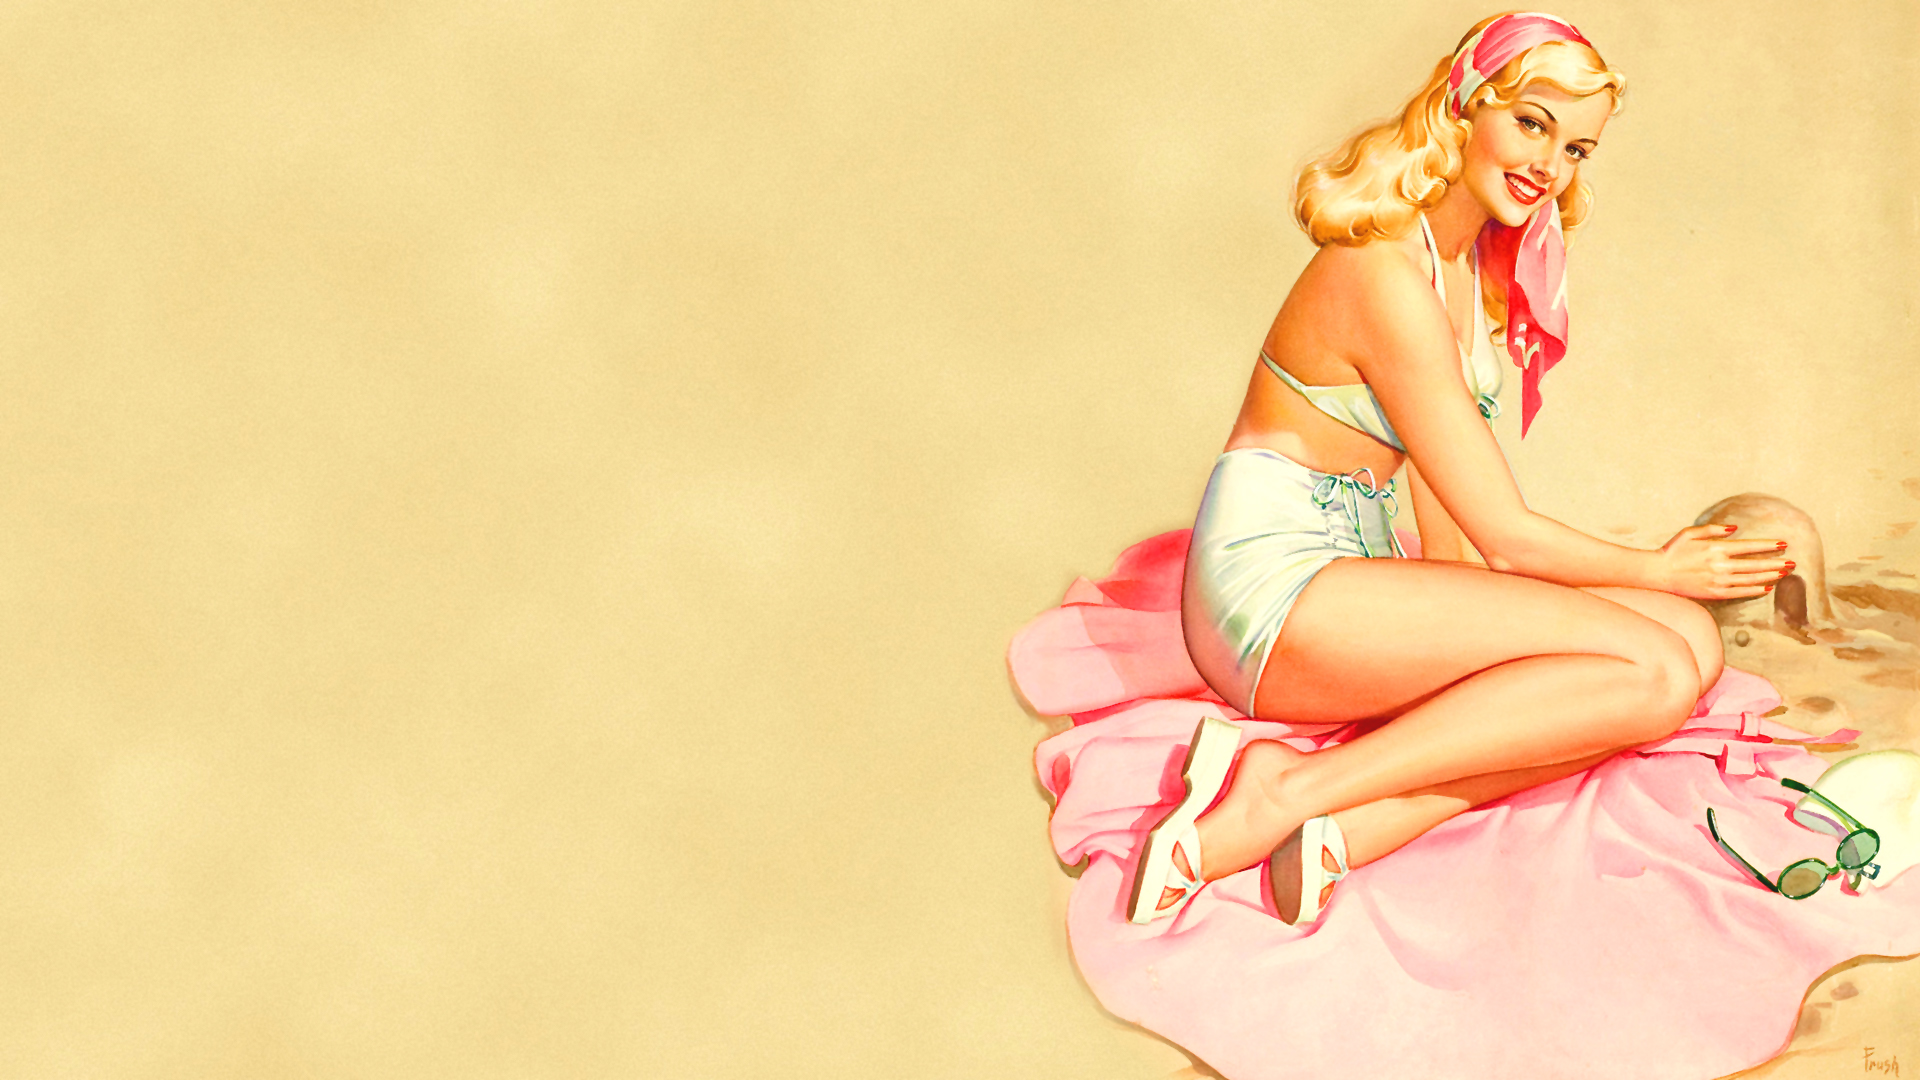 Download the Sandy Pinup Wallpaper, Sandy Pinup iPhone Wallpaper ...